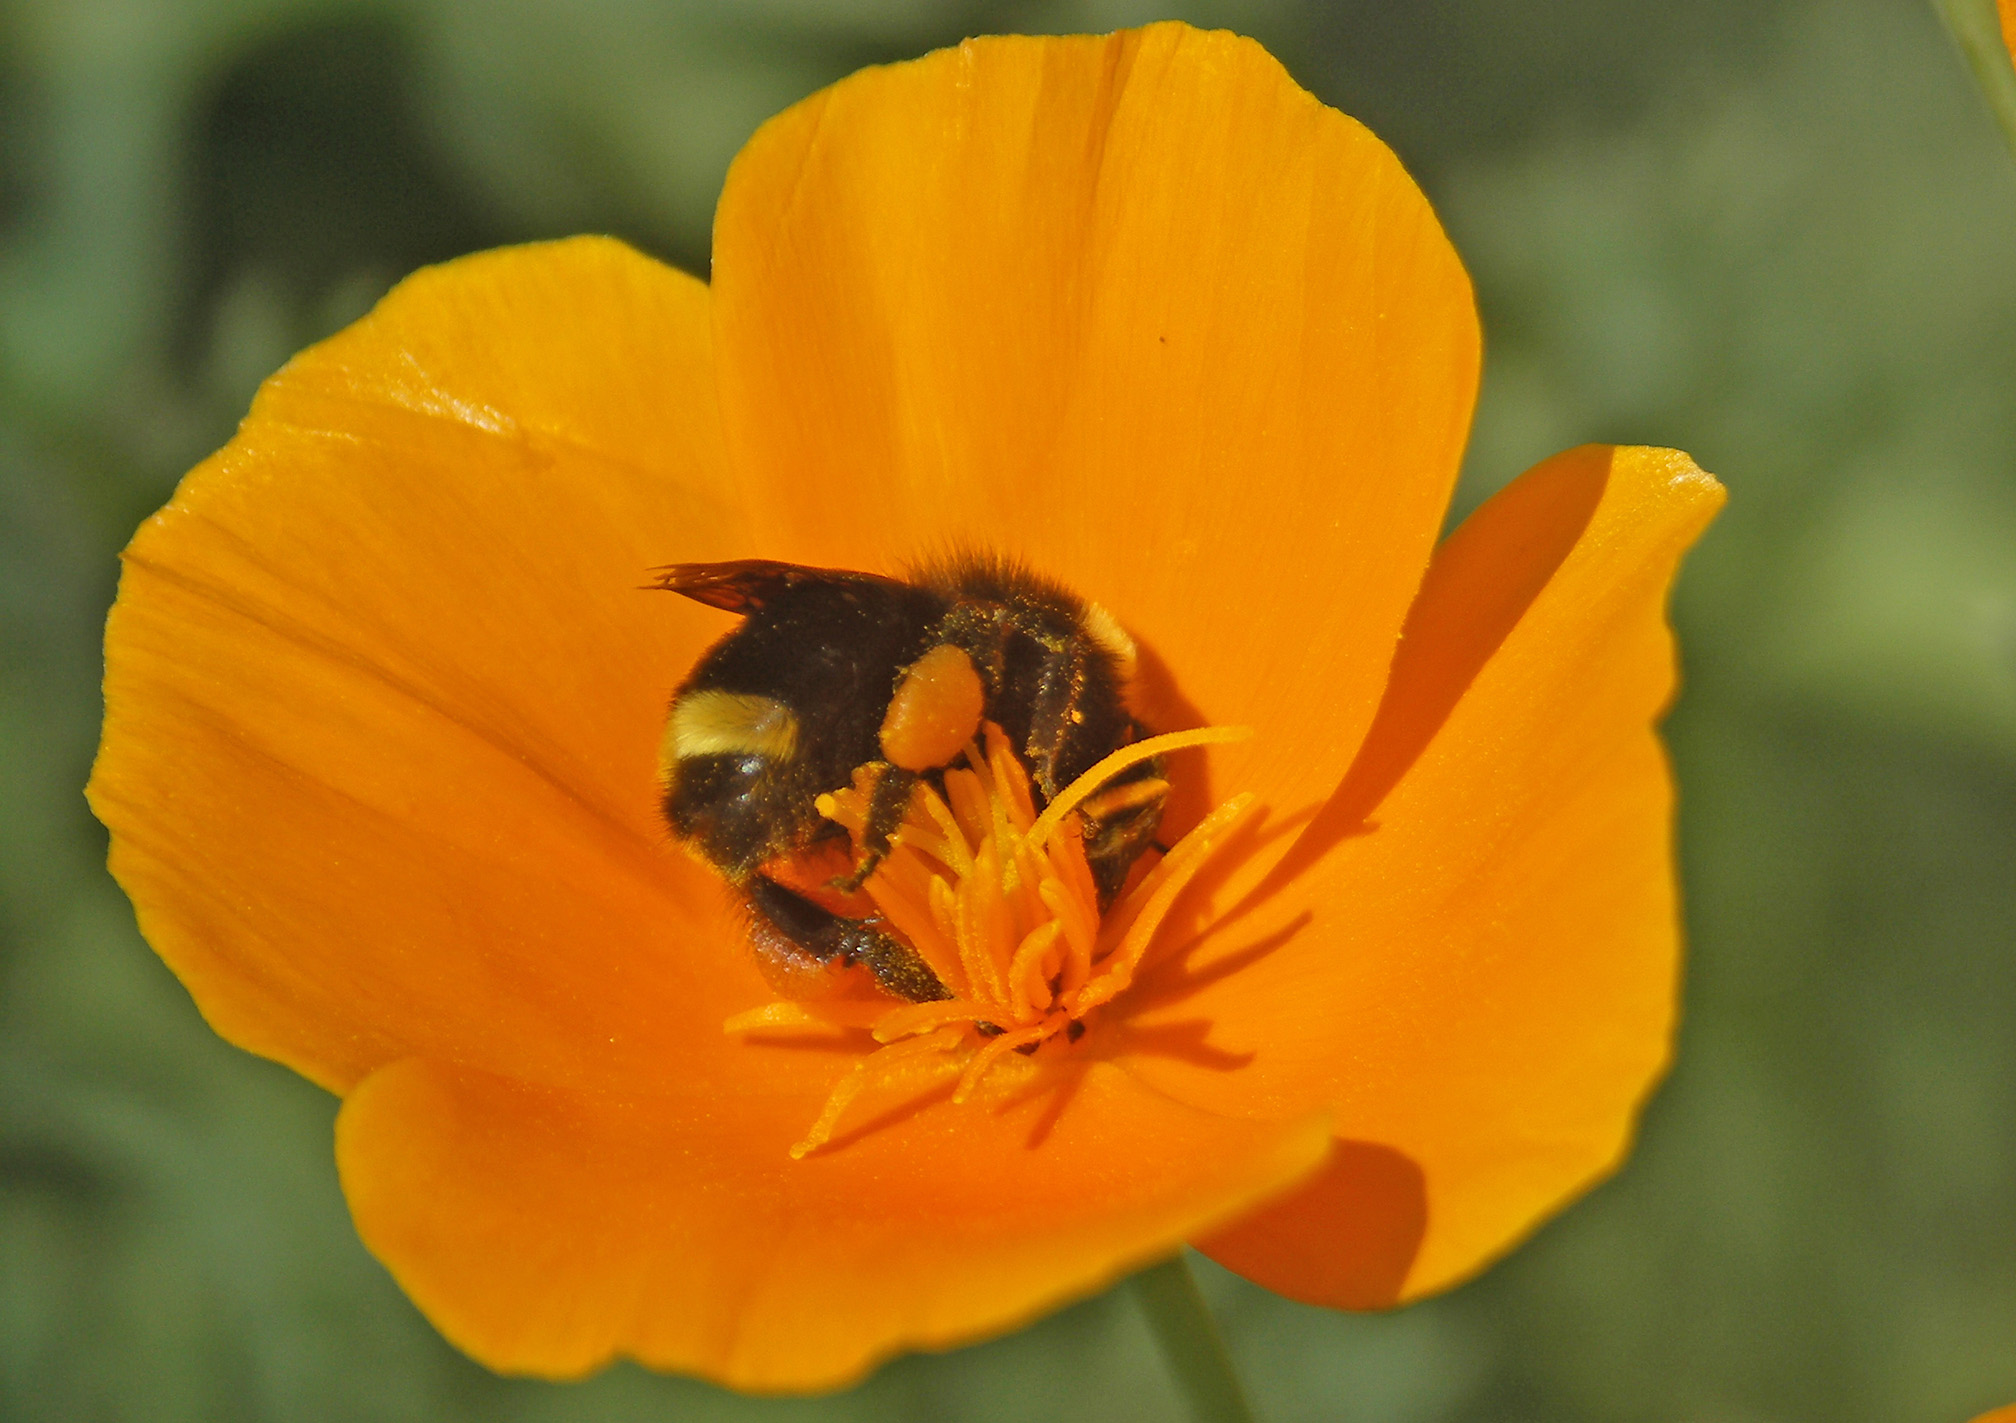 A bright golden-orange flower with five petals fills this photograph. In the middle of the flower is a black and yellow bumble bee